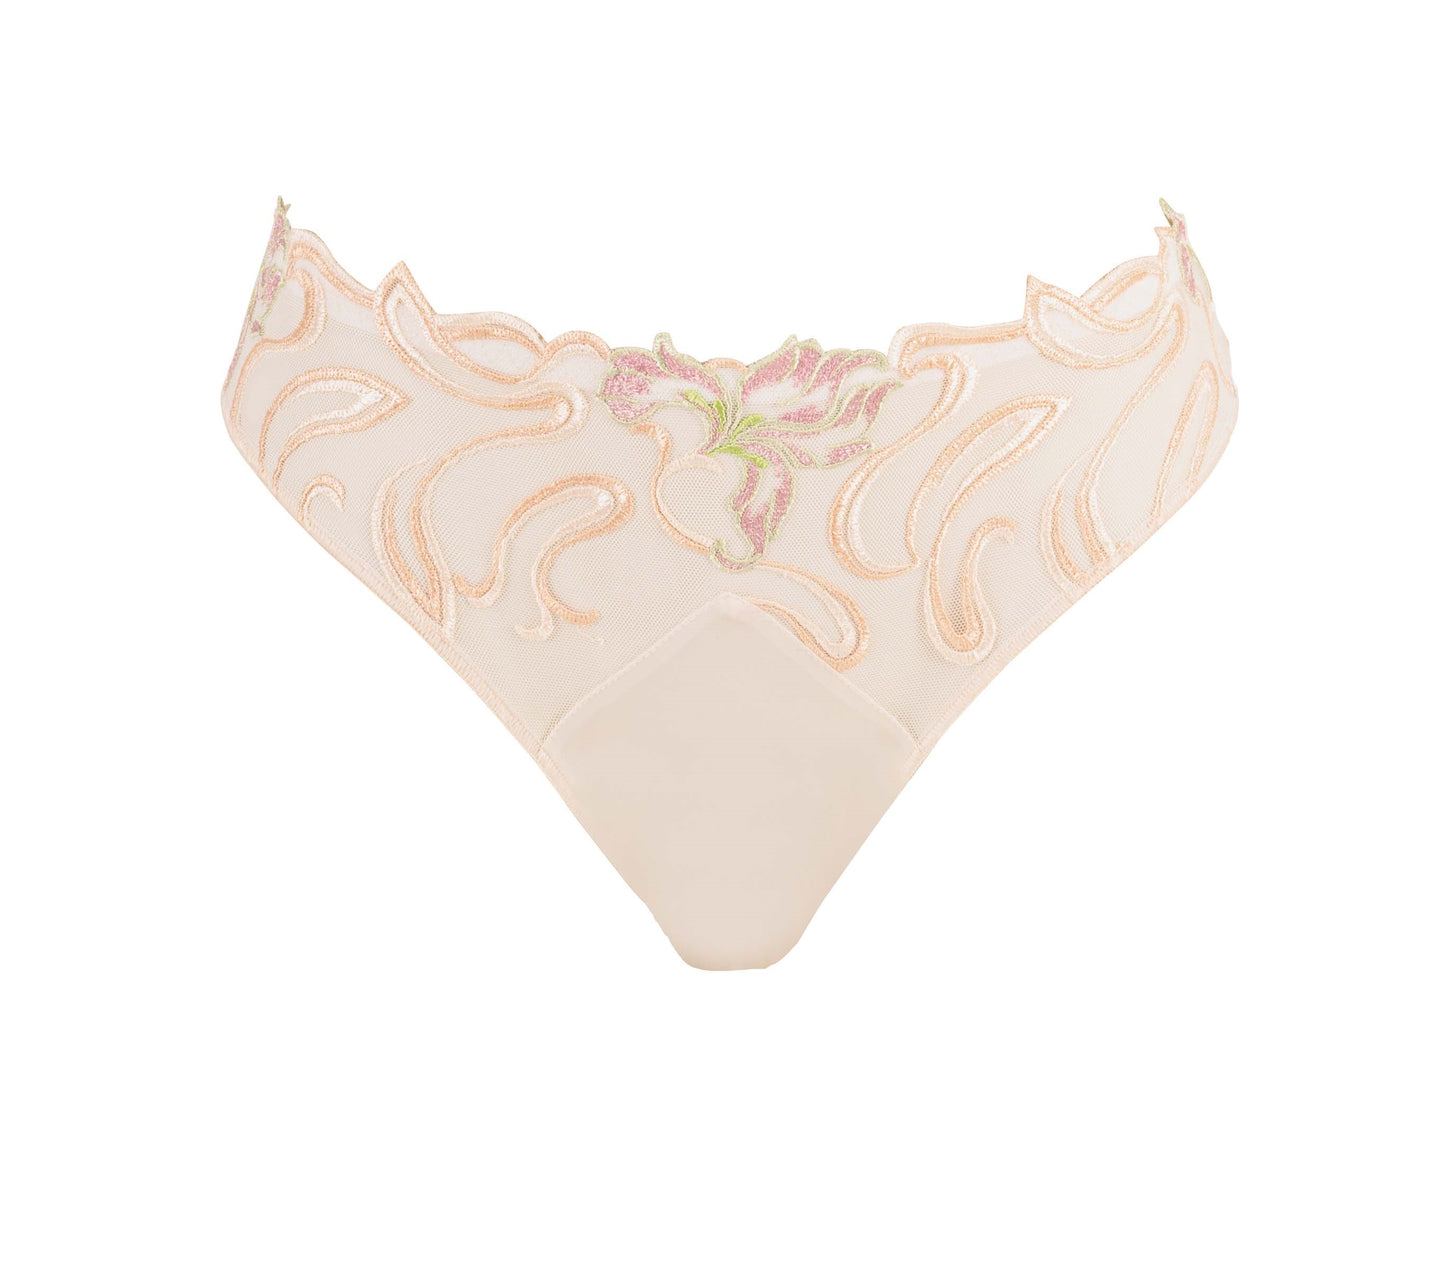 The Horta line's brief paties is inspired by the varied architecture of Victor Horta, a renowned Belgian architect renowned for his involvement in the Art Nouveau movement in Belgium.